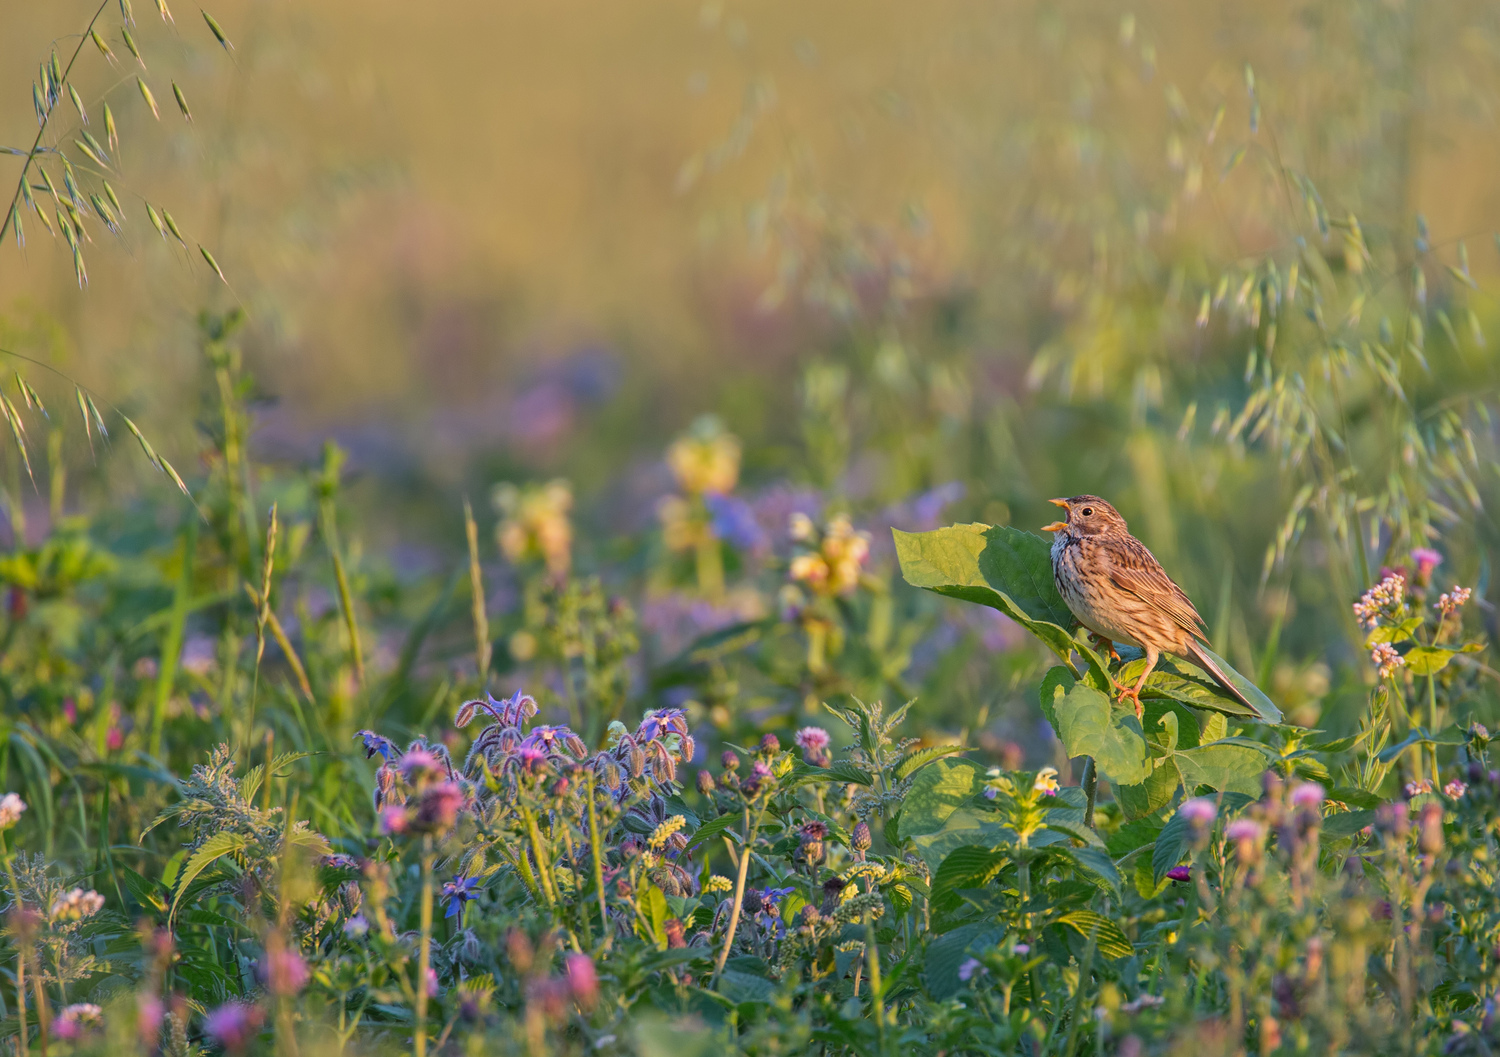 Corn bunting in an area of flowering fallow land.